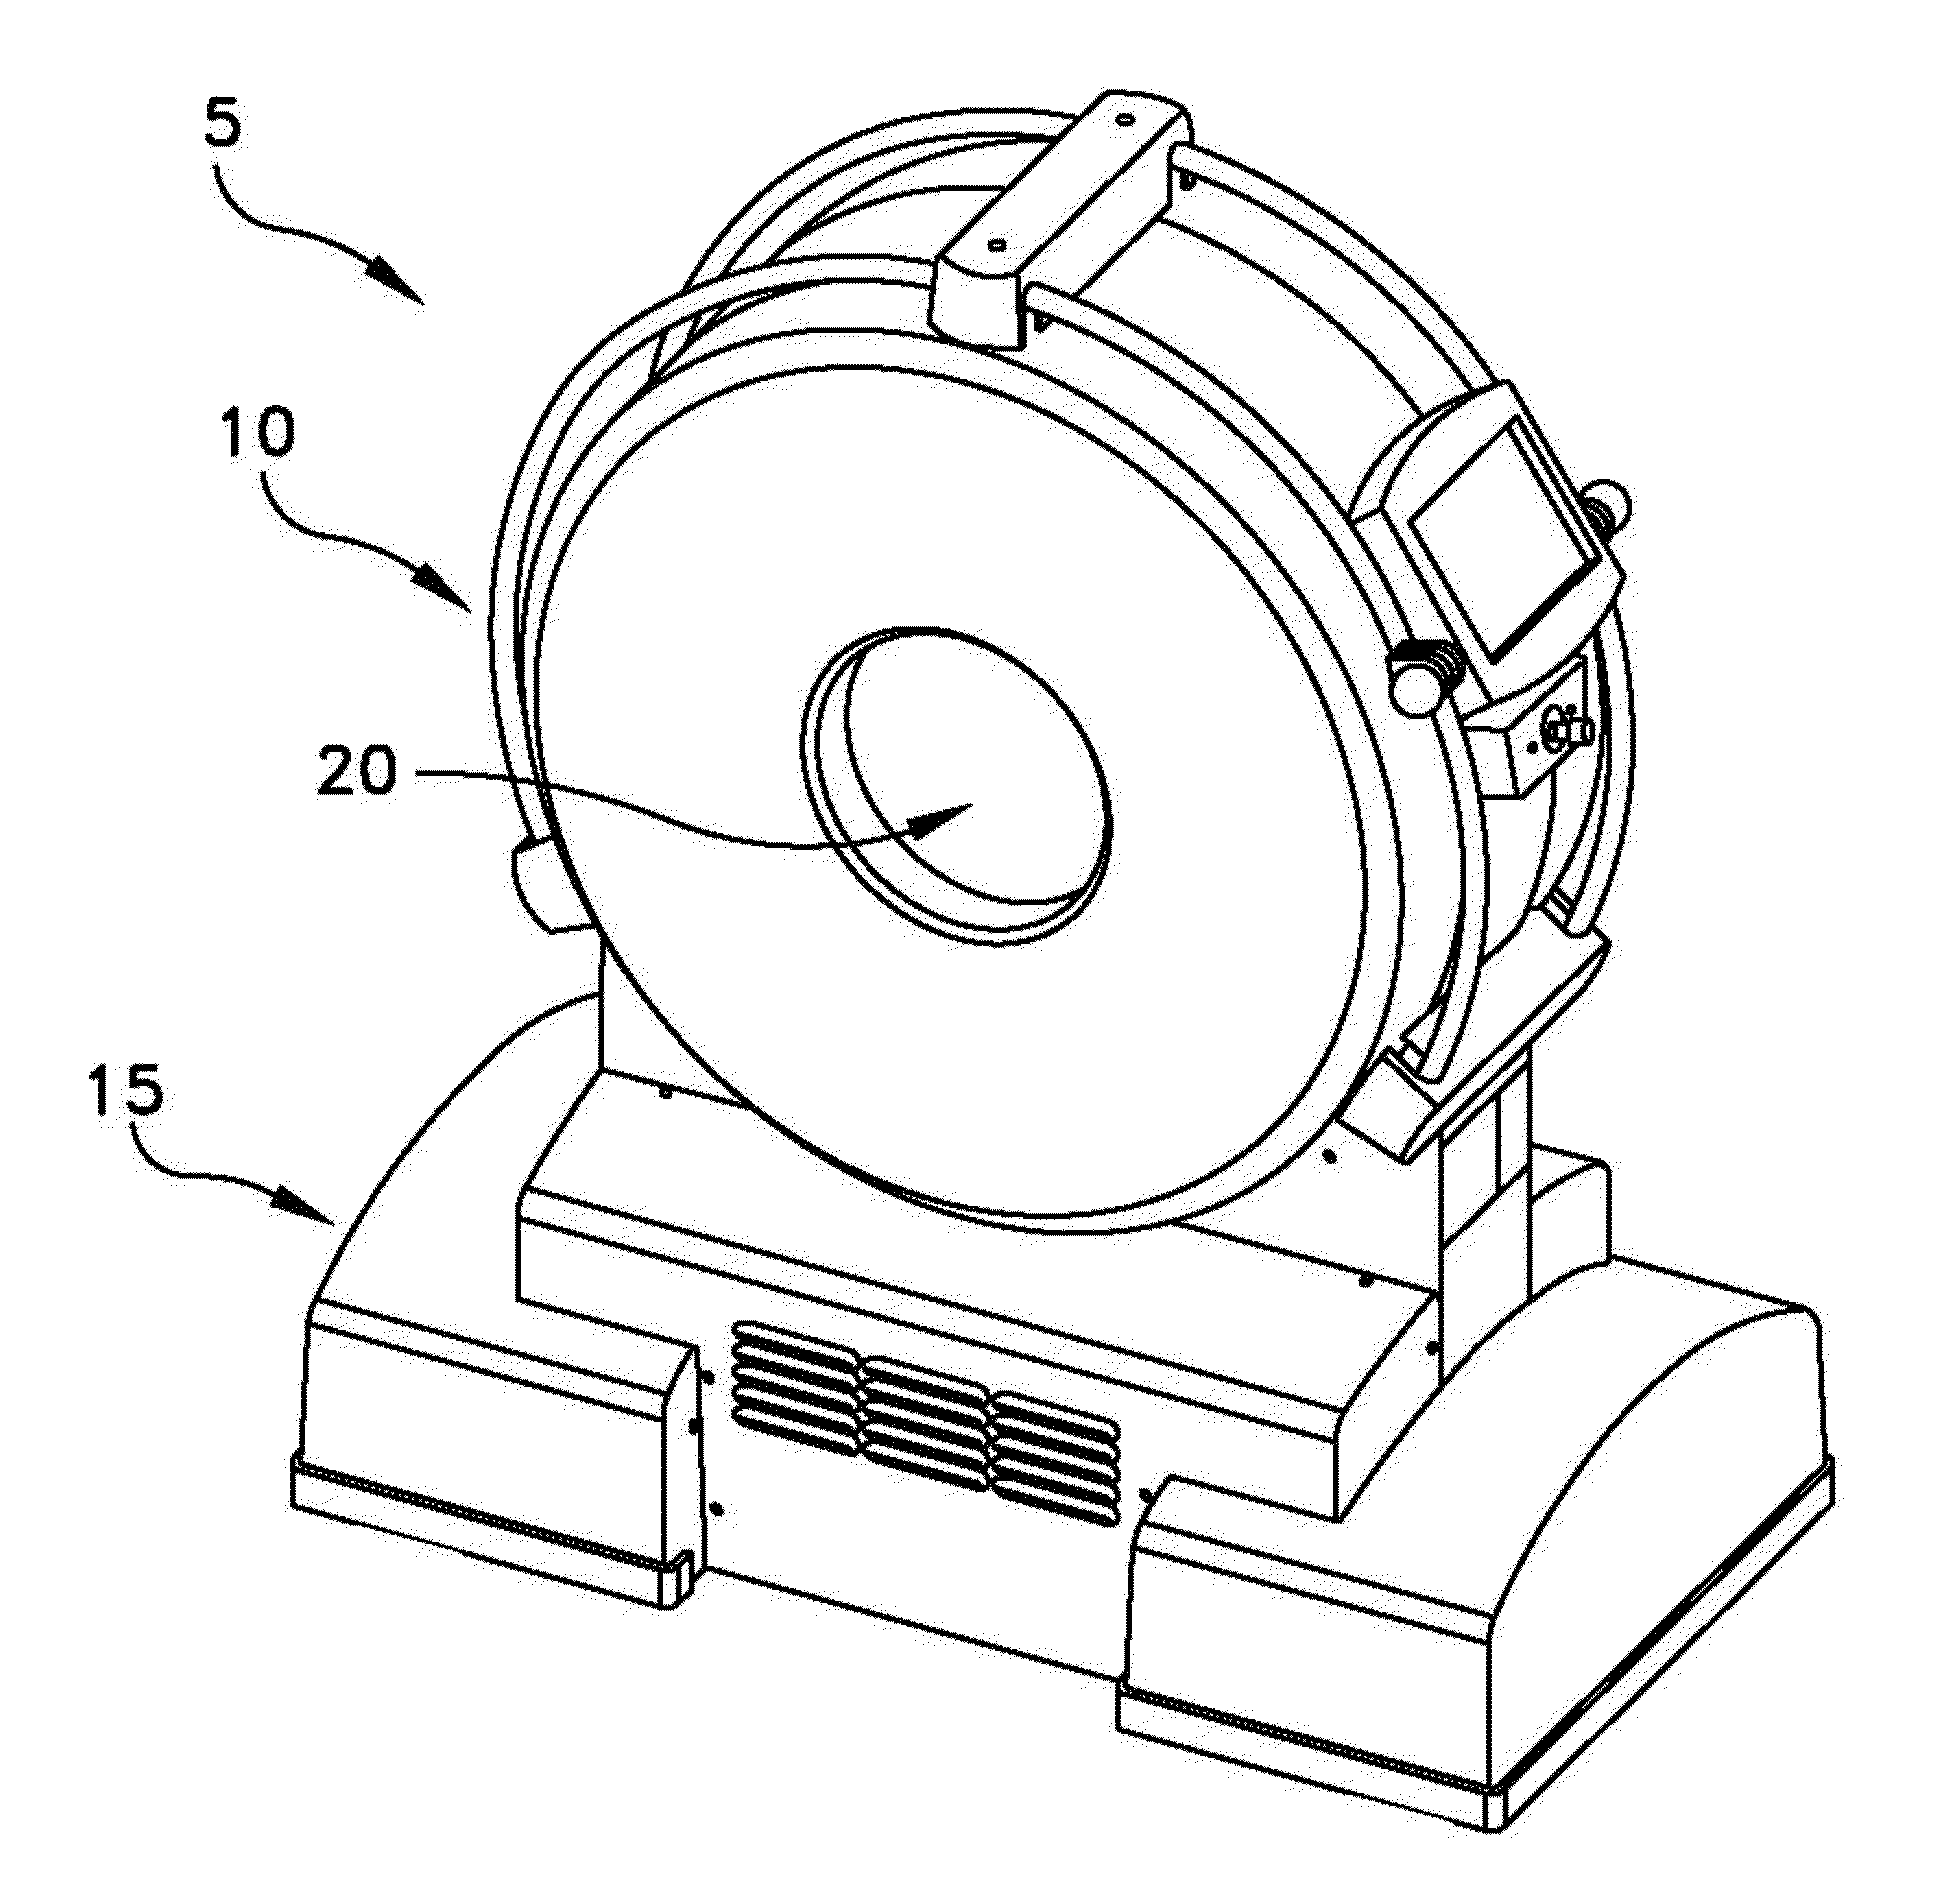 Imaging system with rigidly mounted fiducial markers